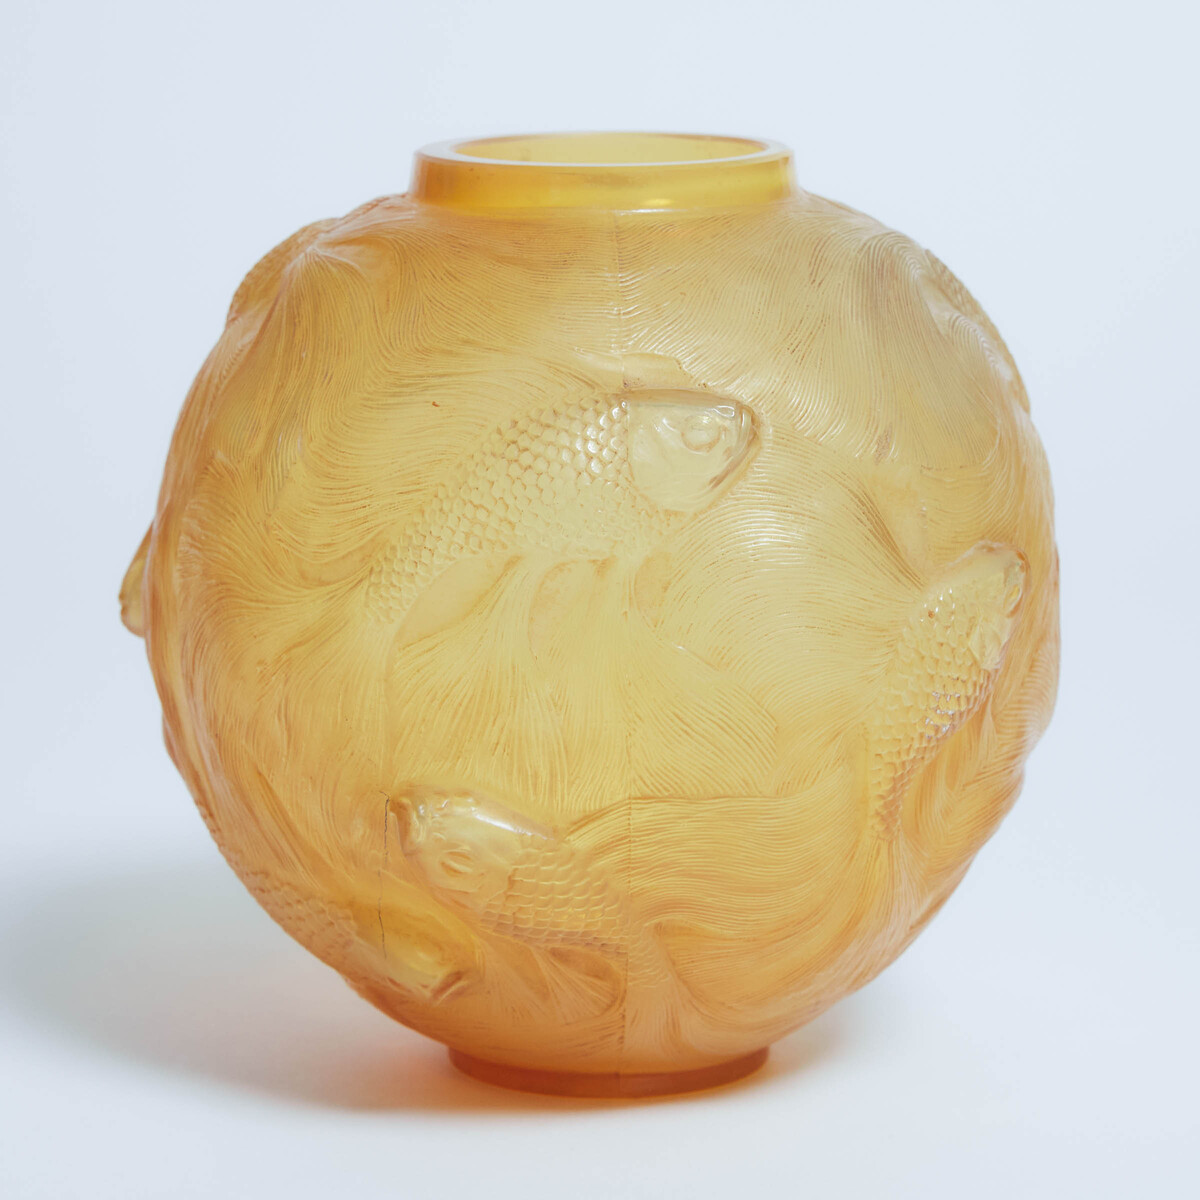 'Formose', Lalique Moulded and Partly Frosted Amber Glass Vase, c.1930, height 6.5 in — 16.5 cm - Image 2 of 3